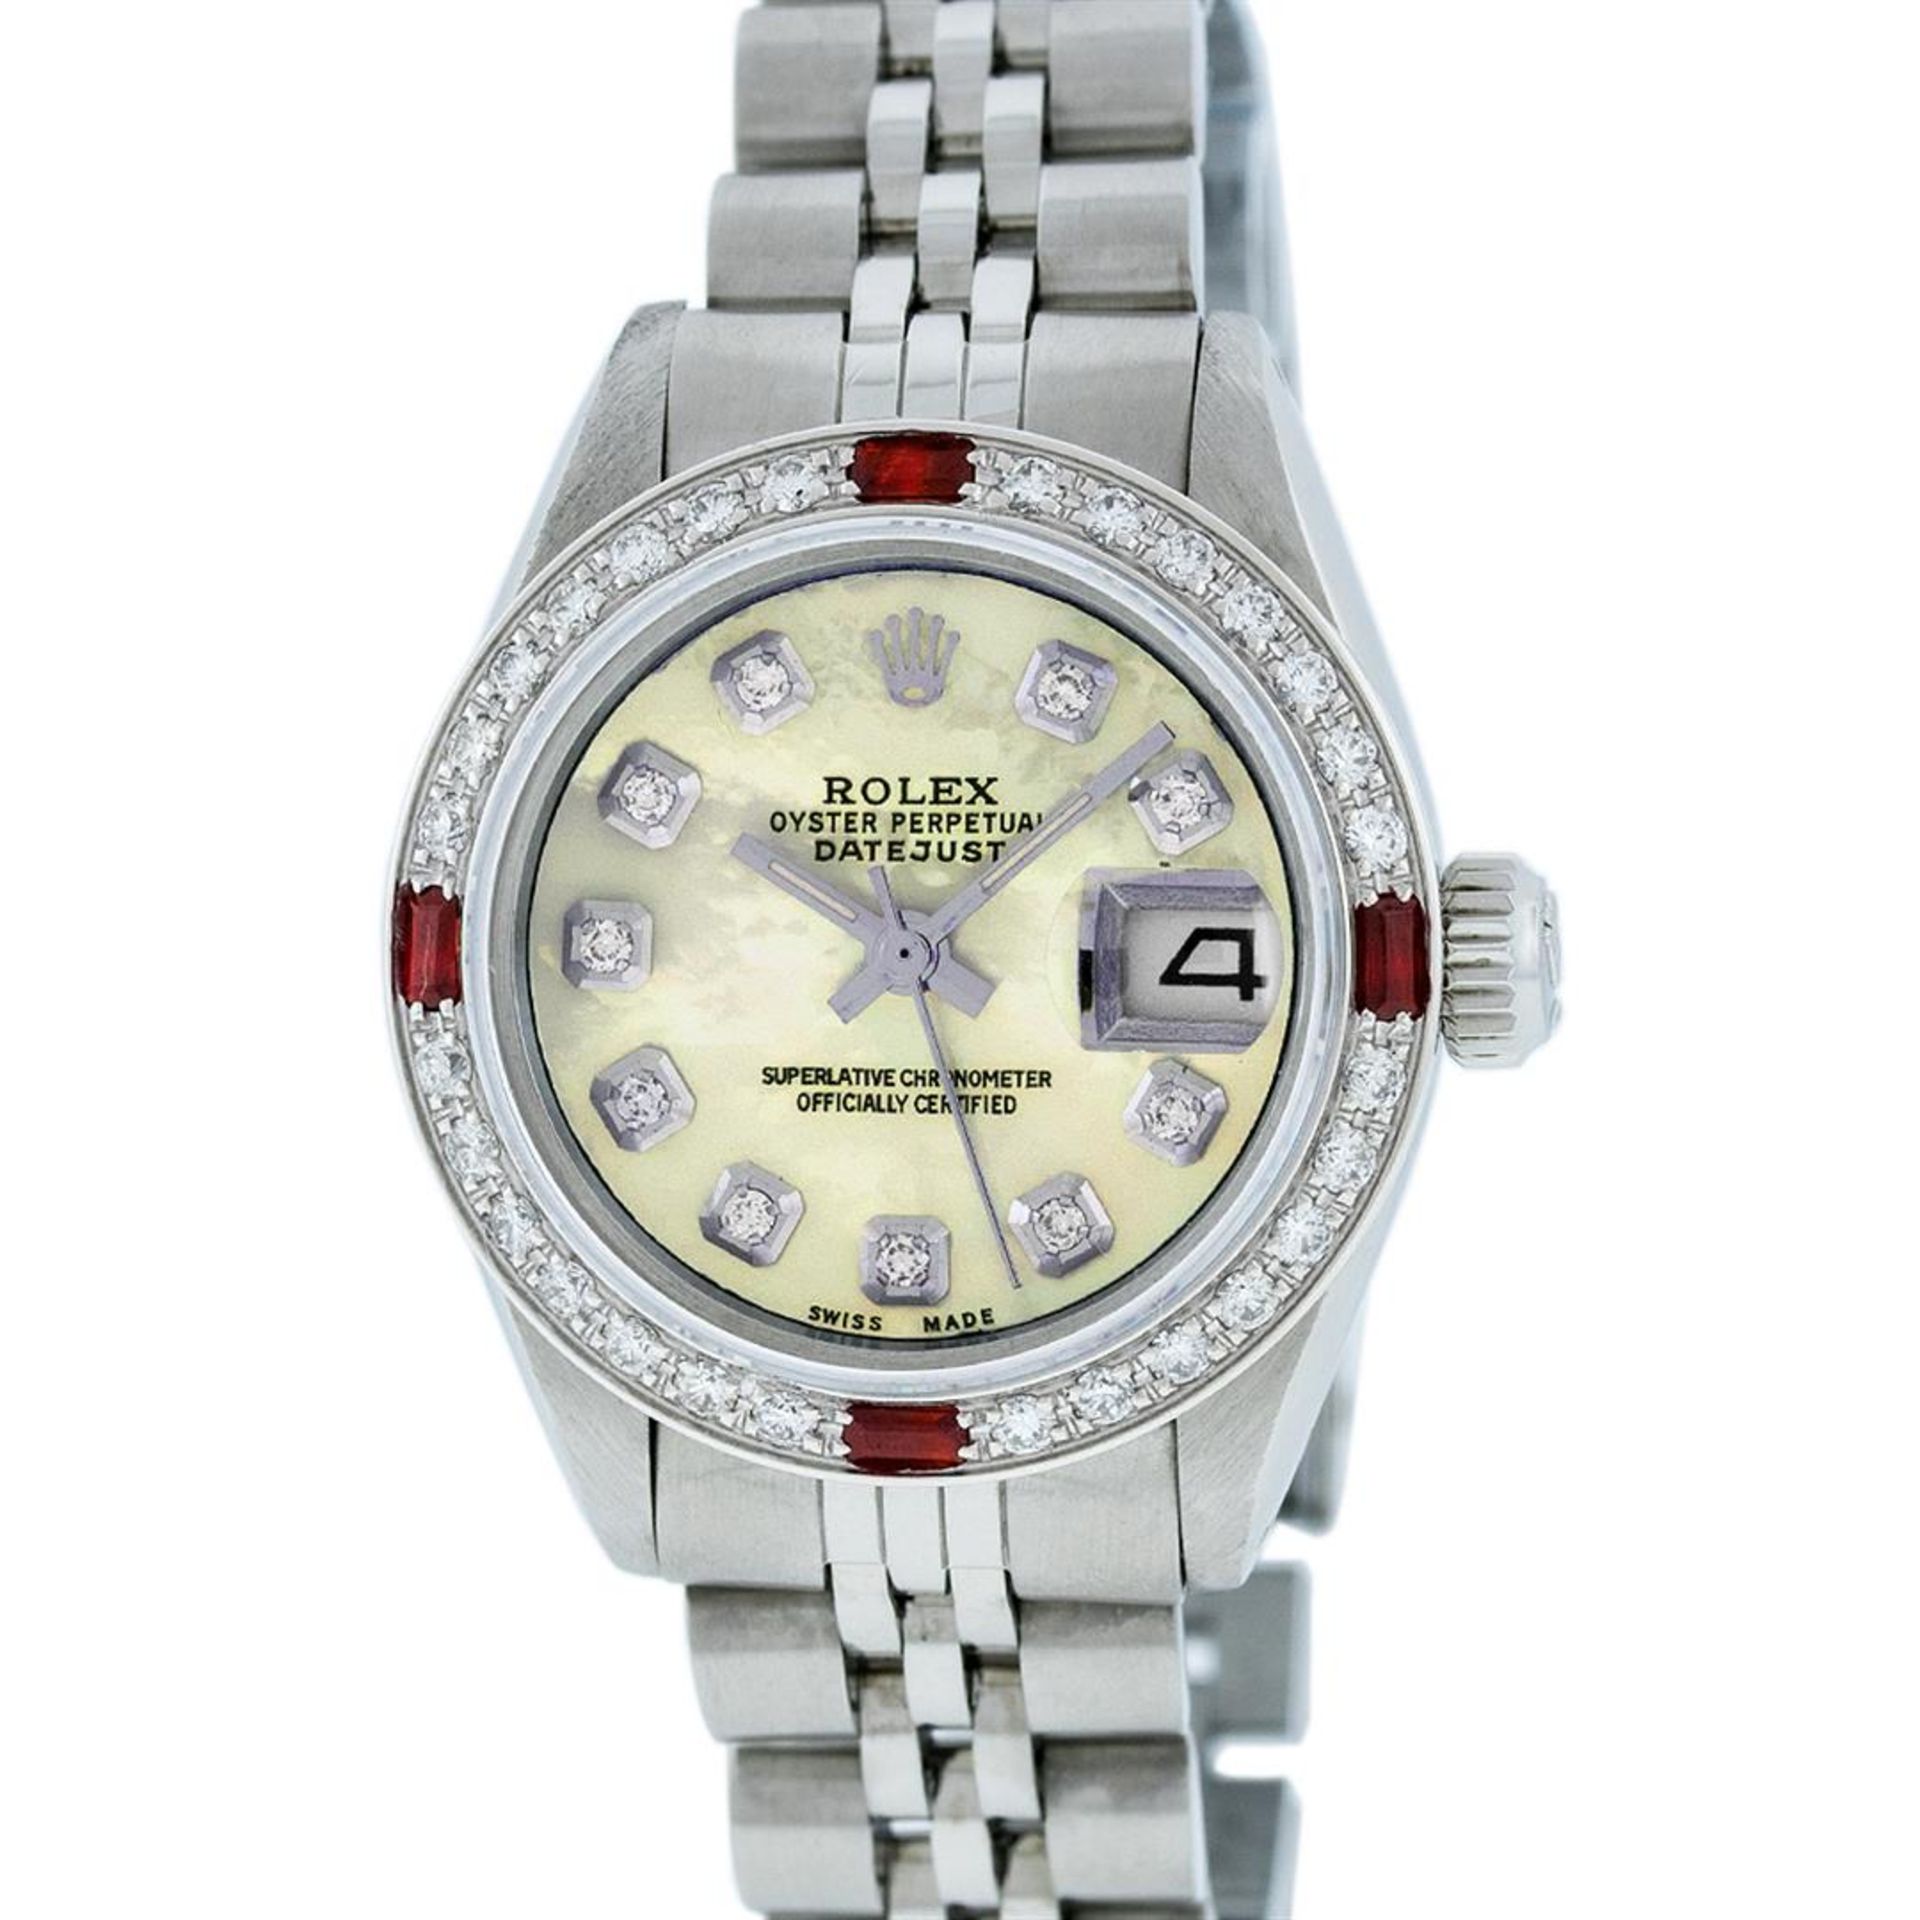 Rolex Ladies Stainless Steel Yellow MOP Diamond & Ruby Datejust Wristwatch - Image 2 of 9